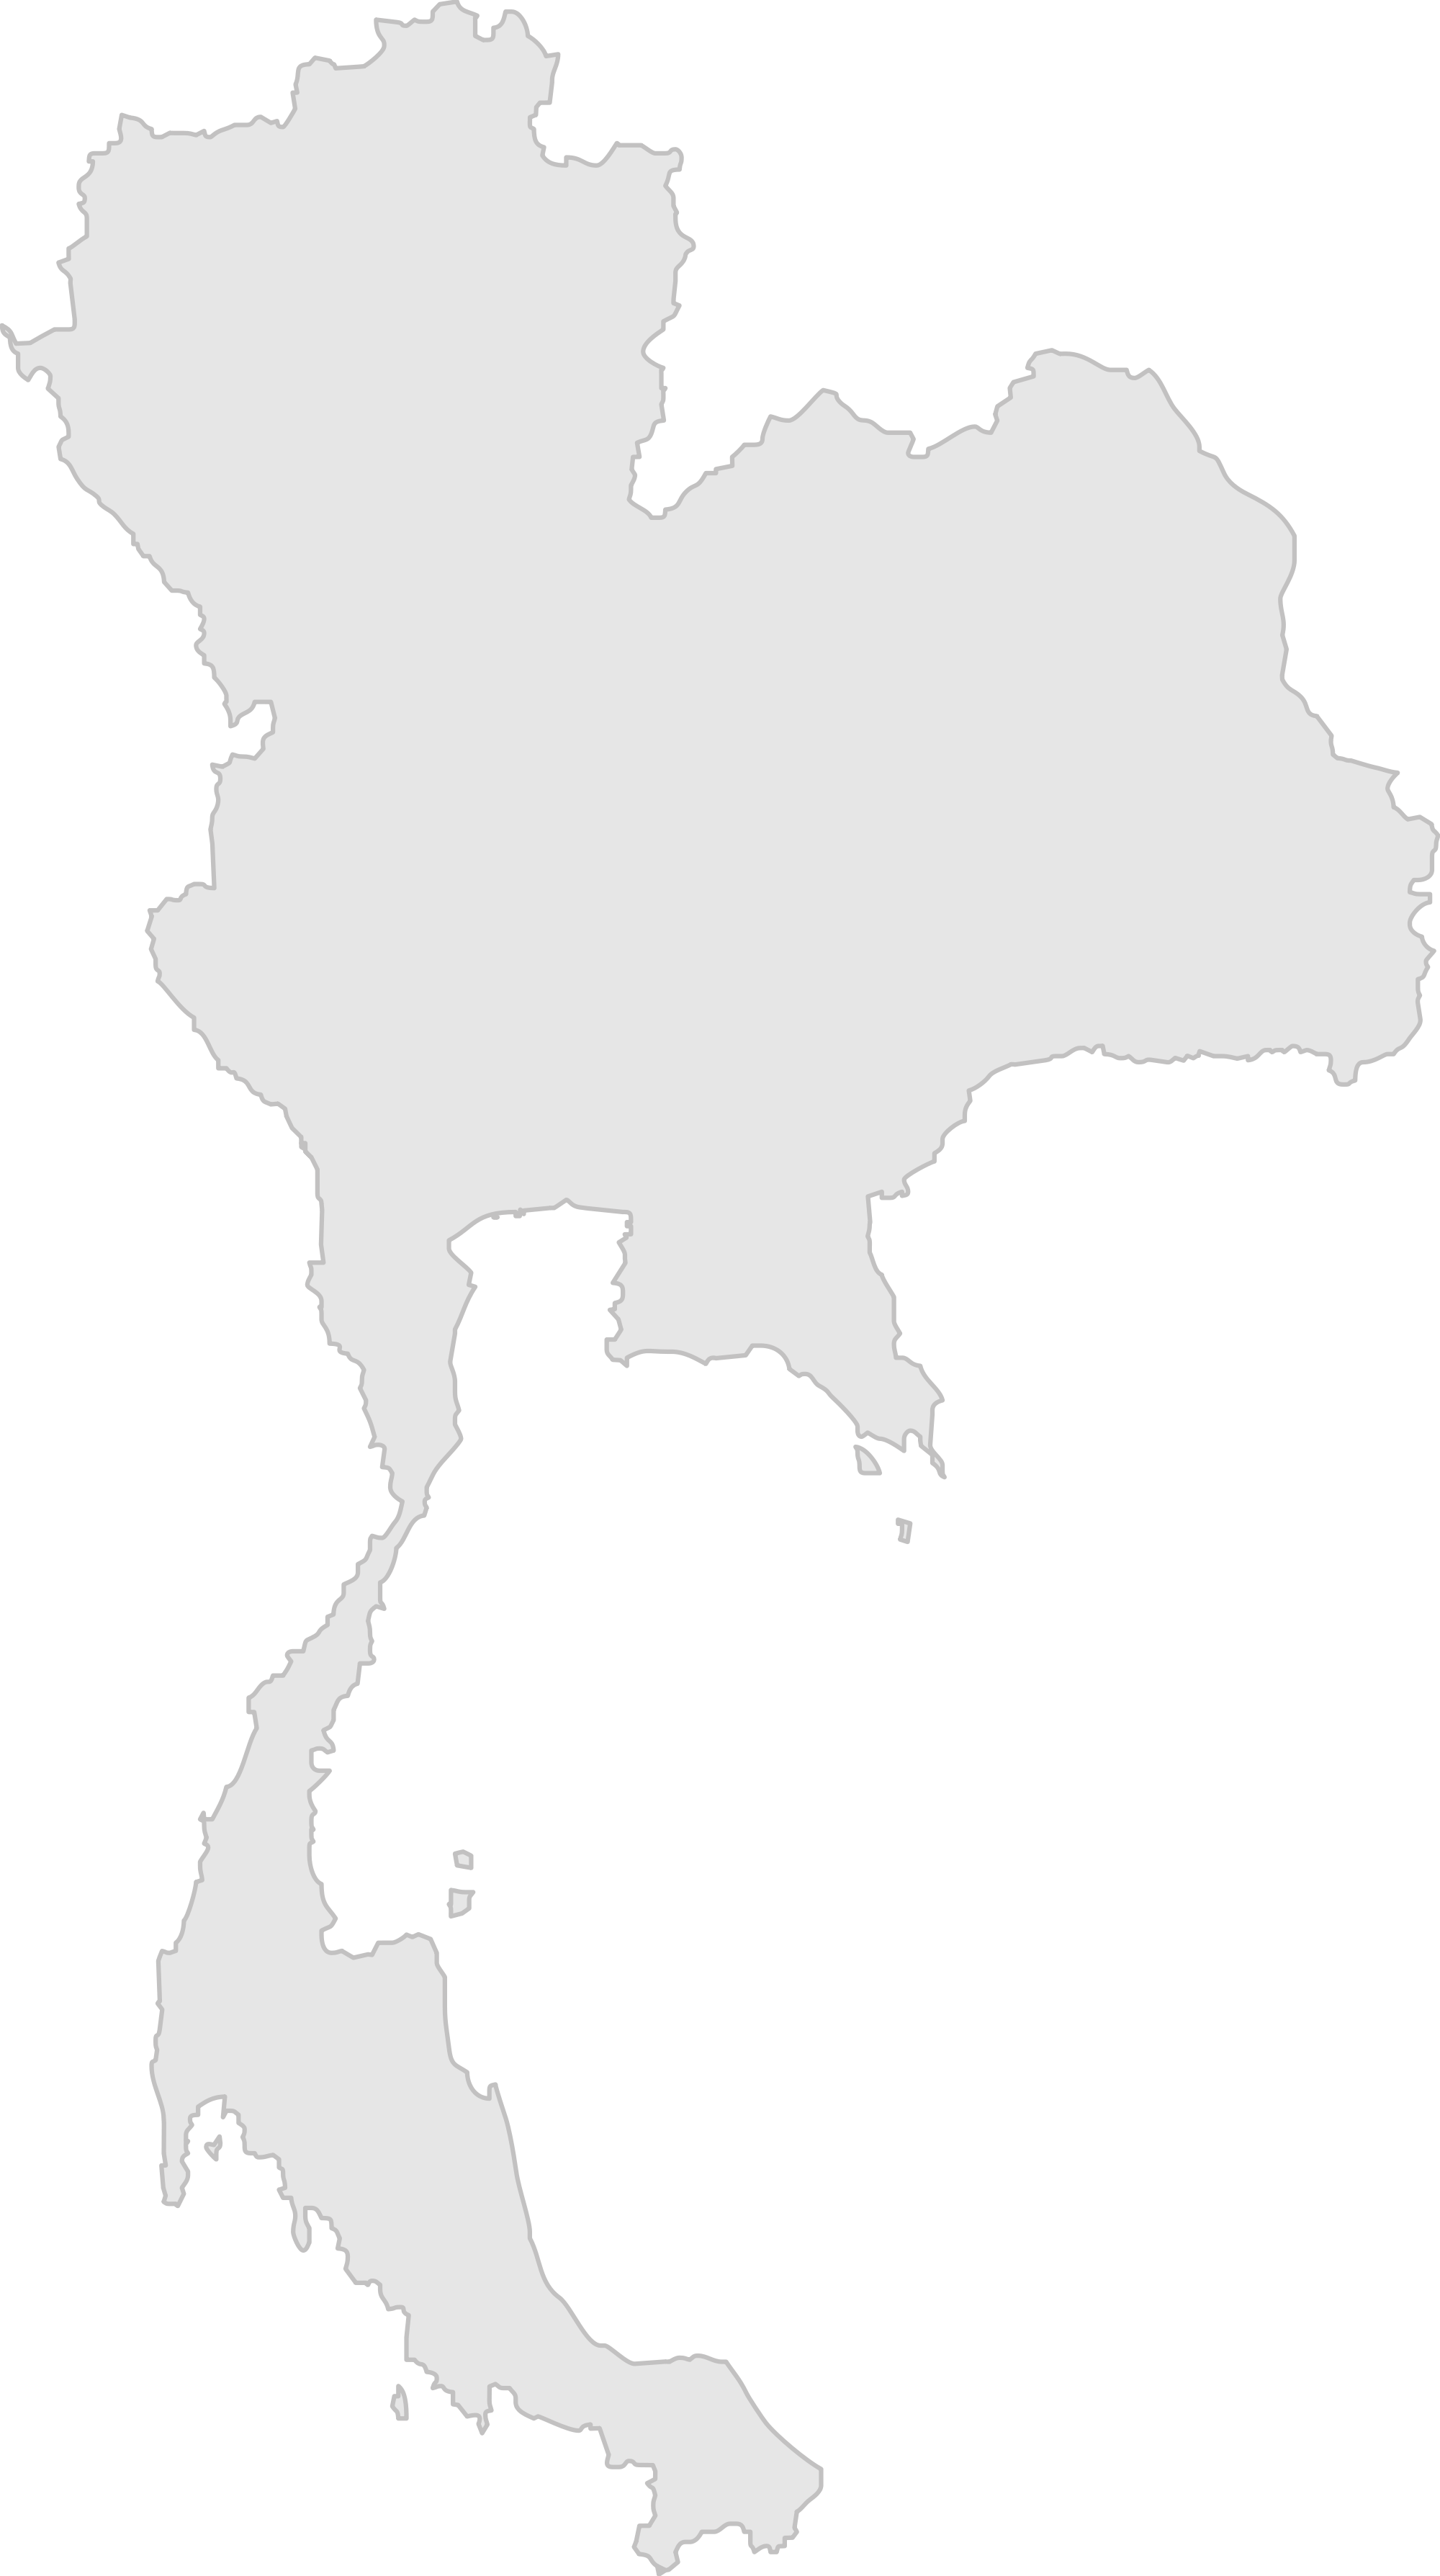 A White Outline Of A Map